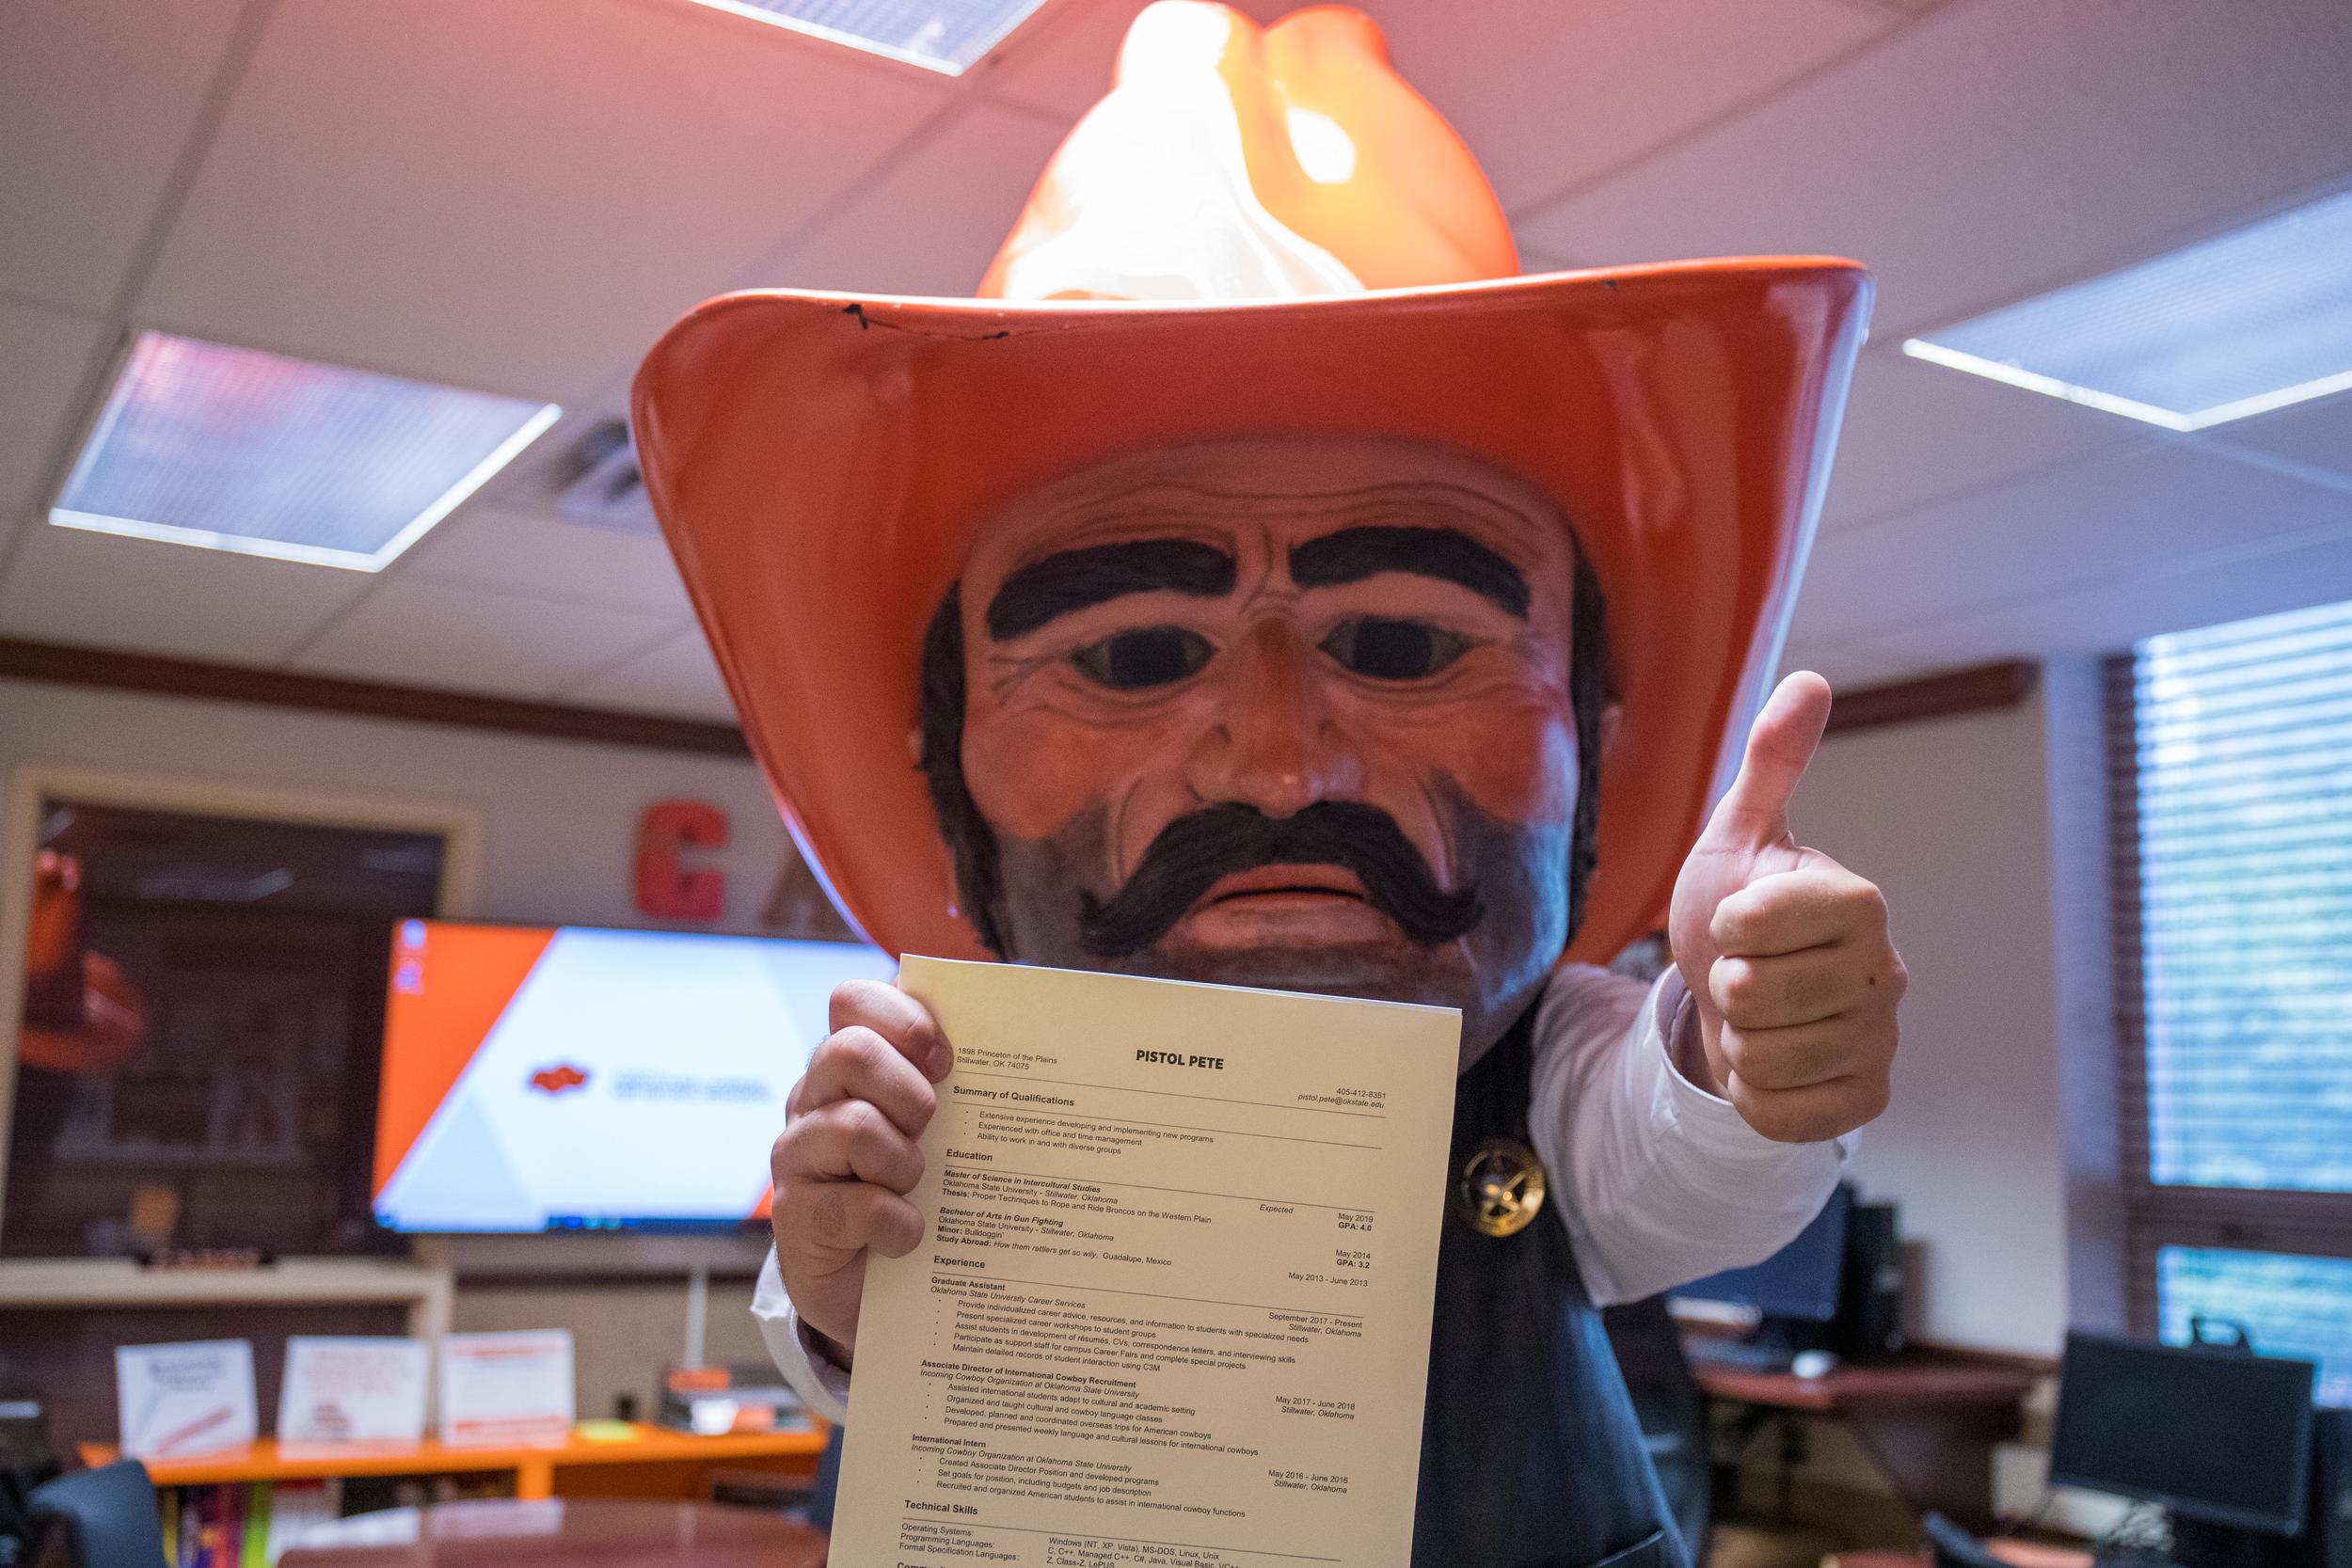 Pistol Pete holds a piece of paper and gives the "thumbs up" hand signal.